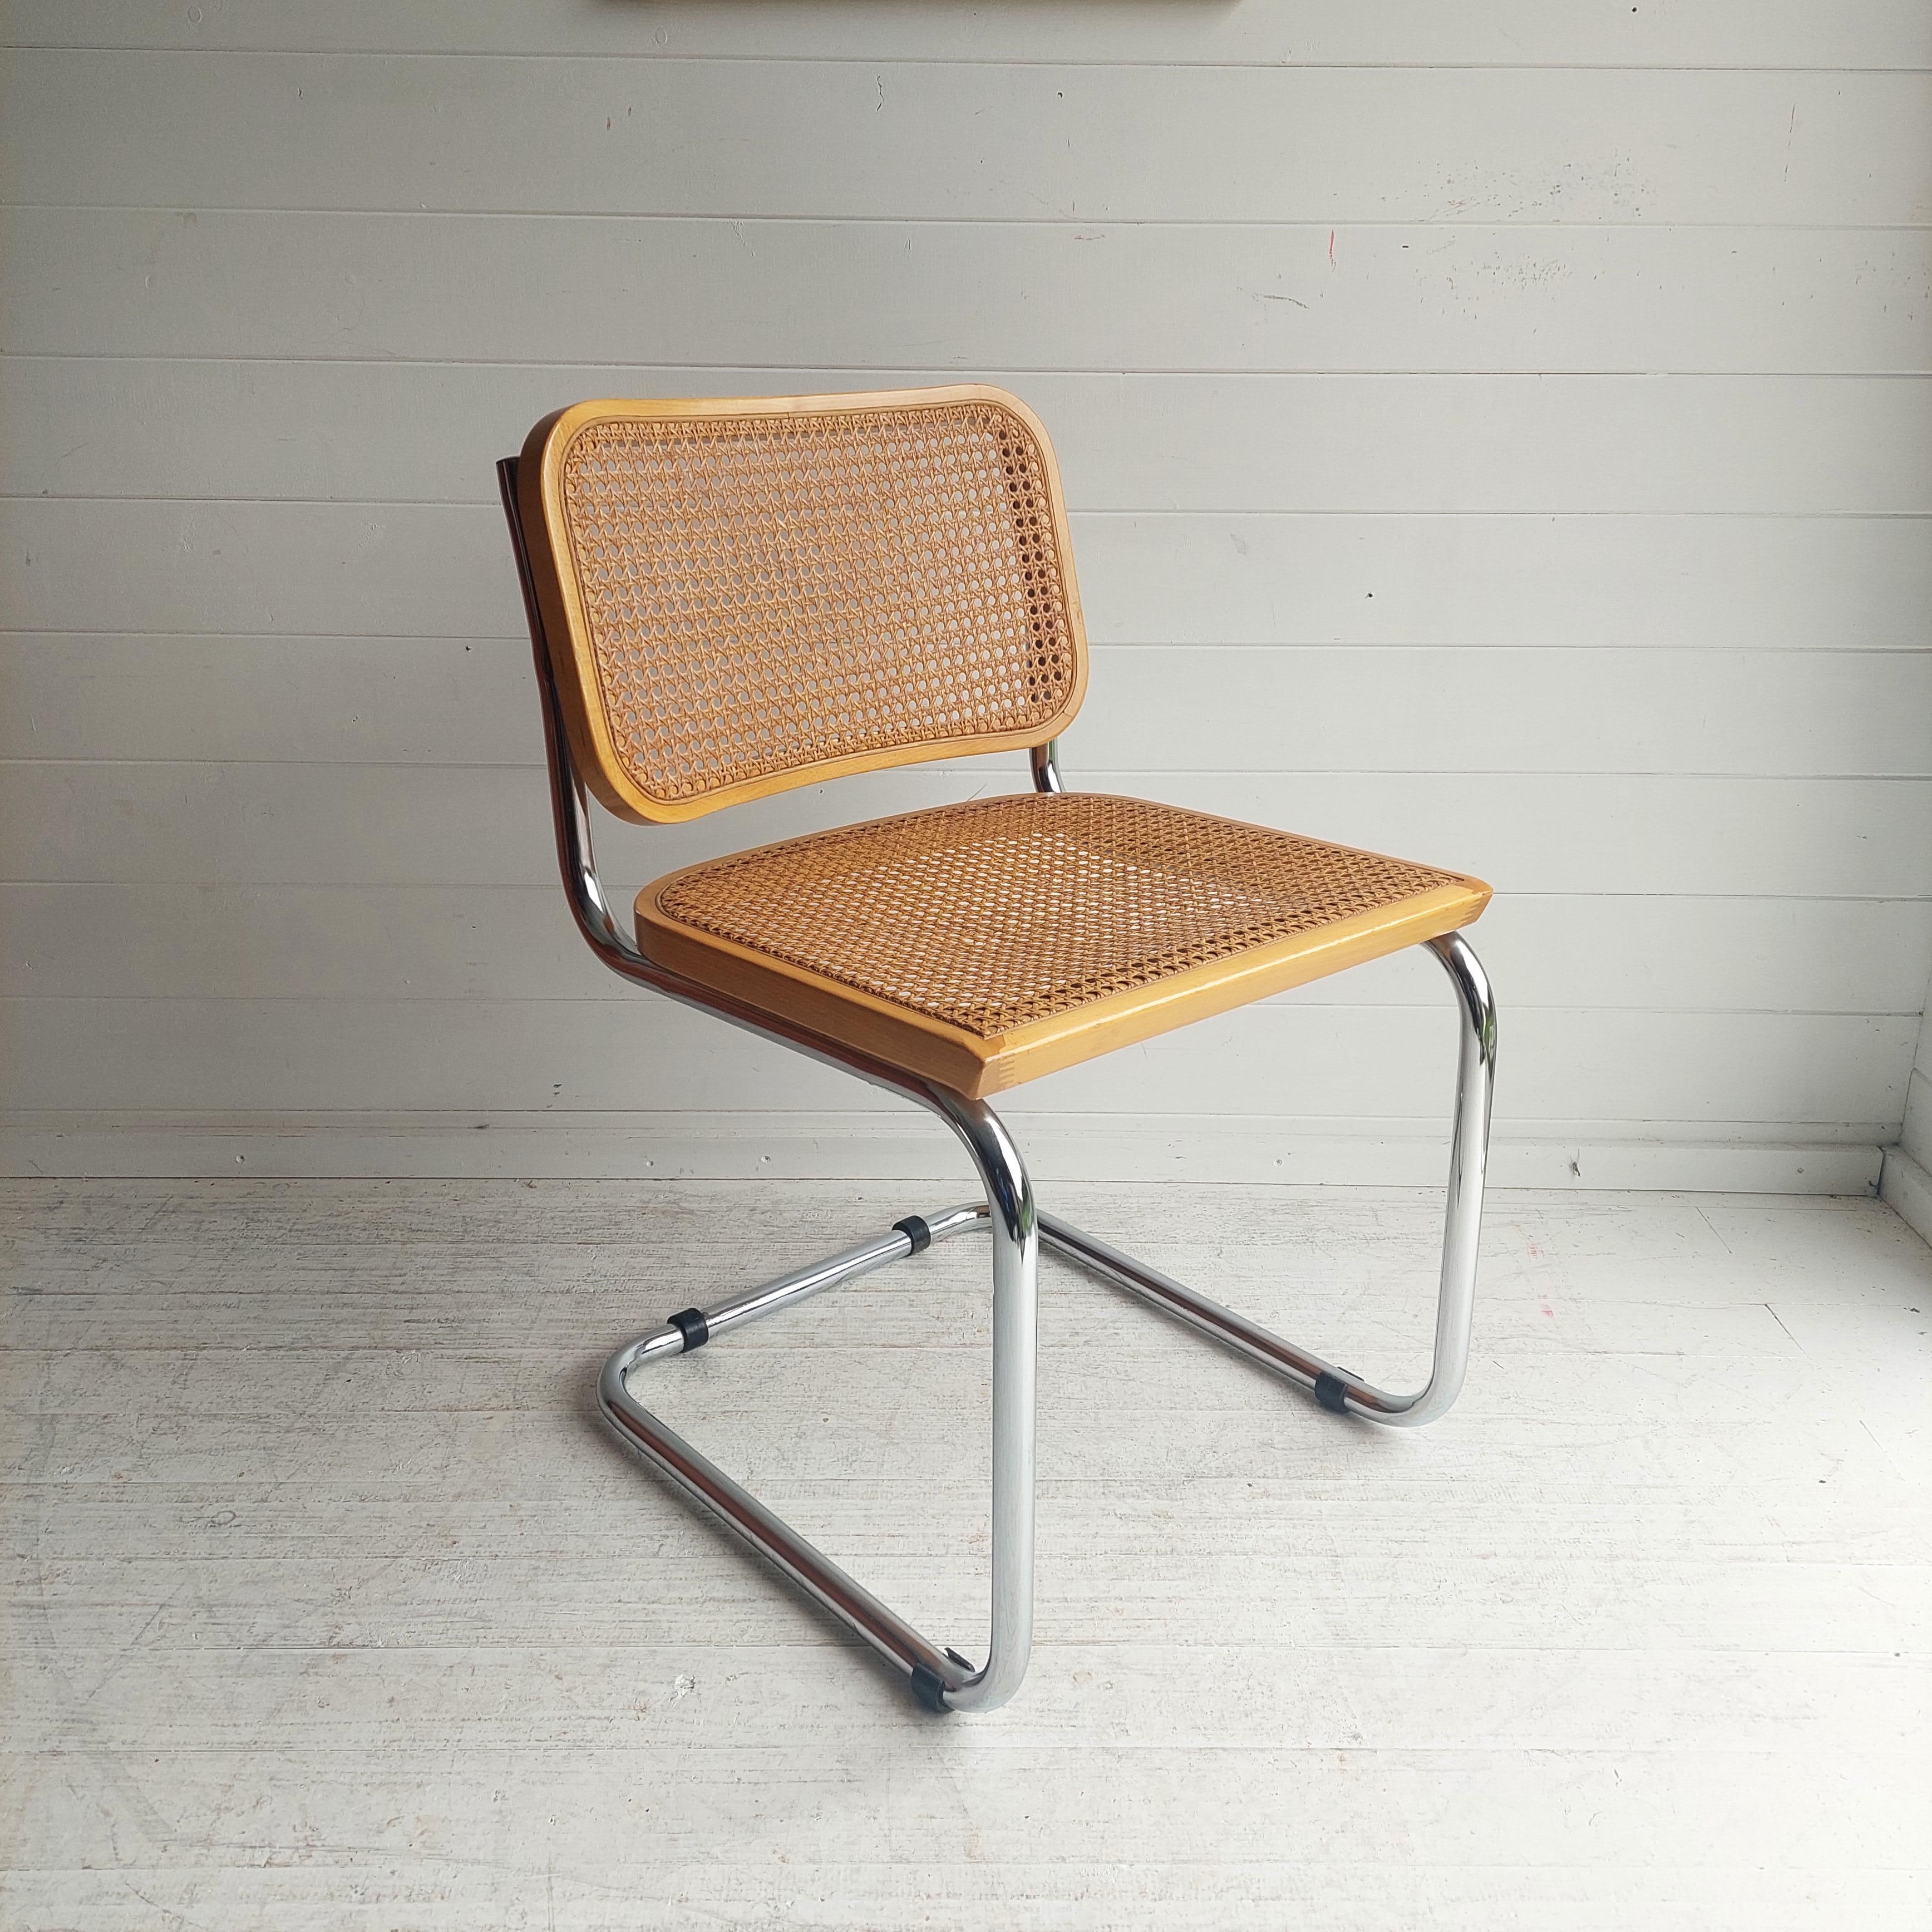 A chair, influenced by Marcel Breuer's Cesca chair (also known as the B32 chair), designed in the 1920's.
This chair dates from the 1970/80's, was made in Italy.

Features:
The chrome tubular frame
The beech frame with a lovely mellow colour.
Cane